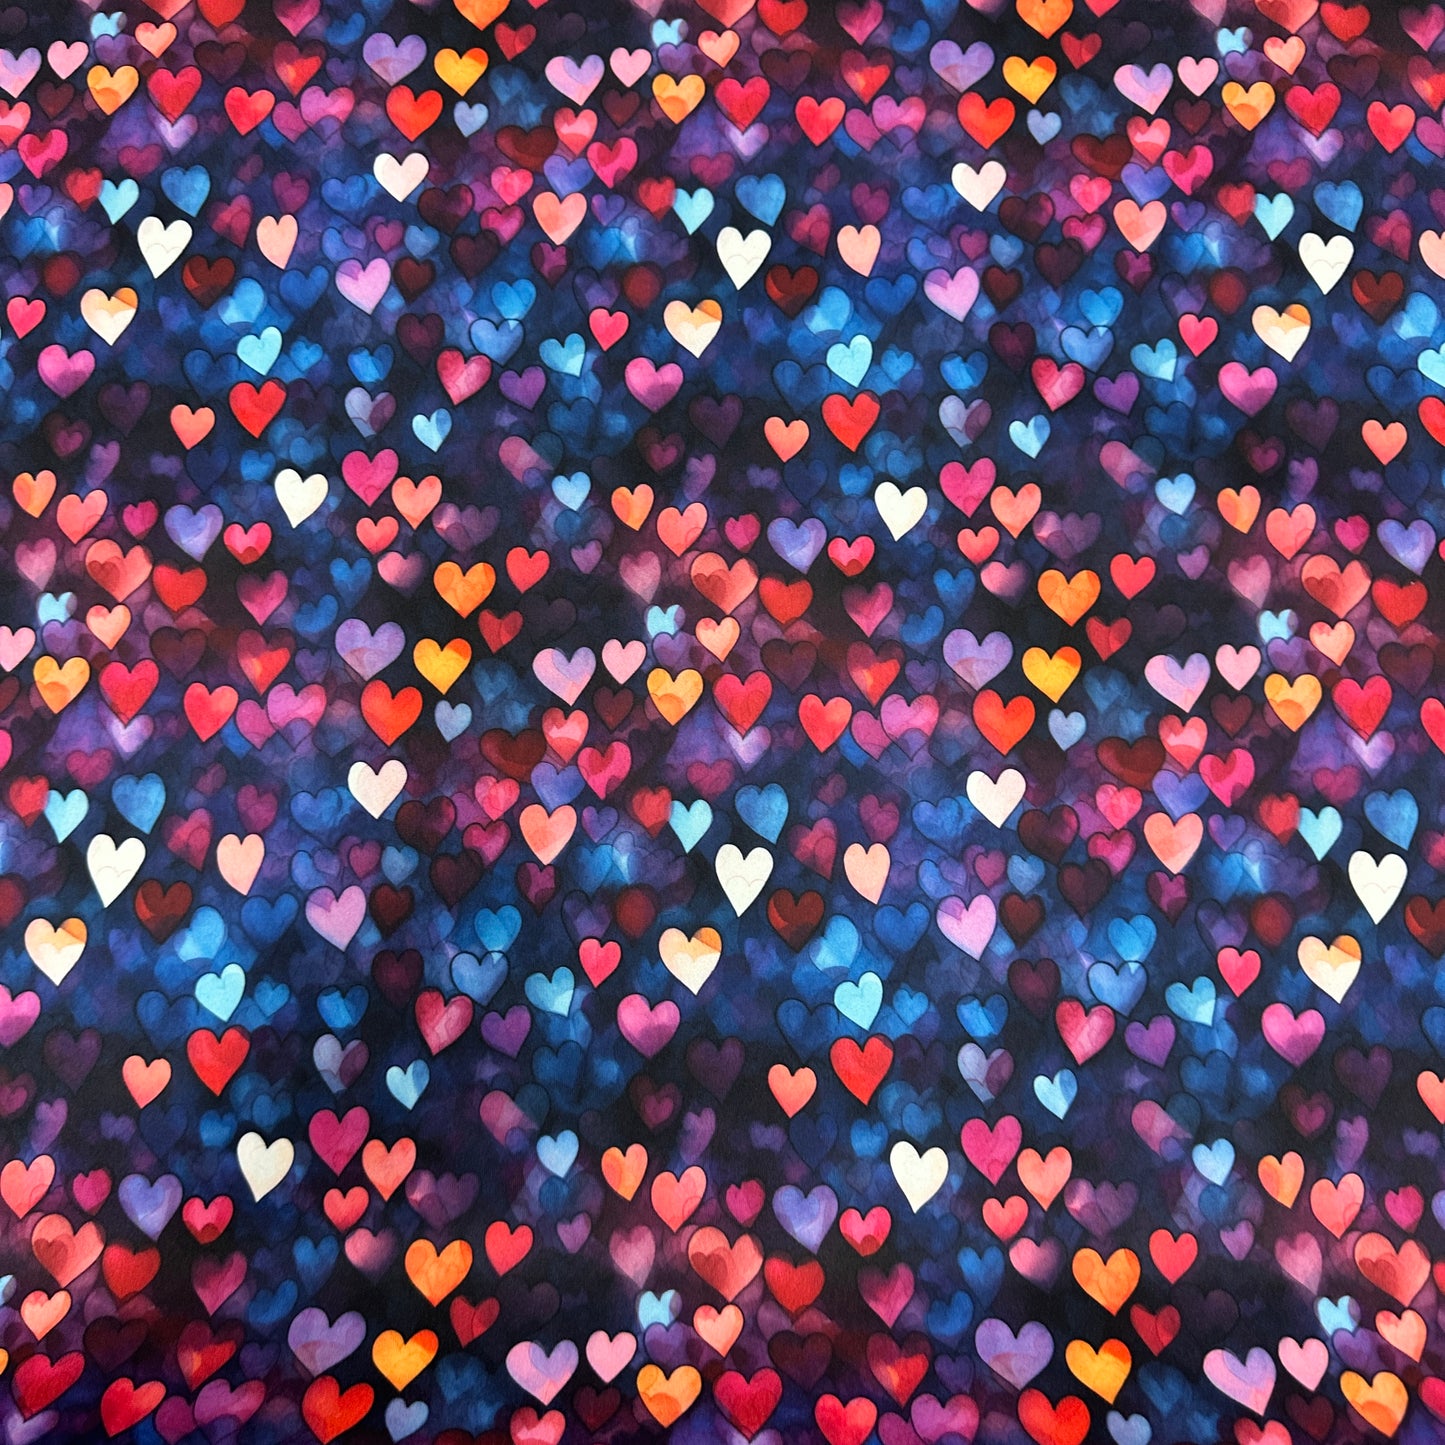 Painted Hearts 1 mil PUL Fabric - Made in the USA